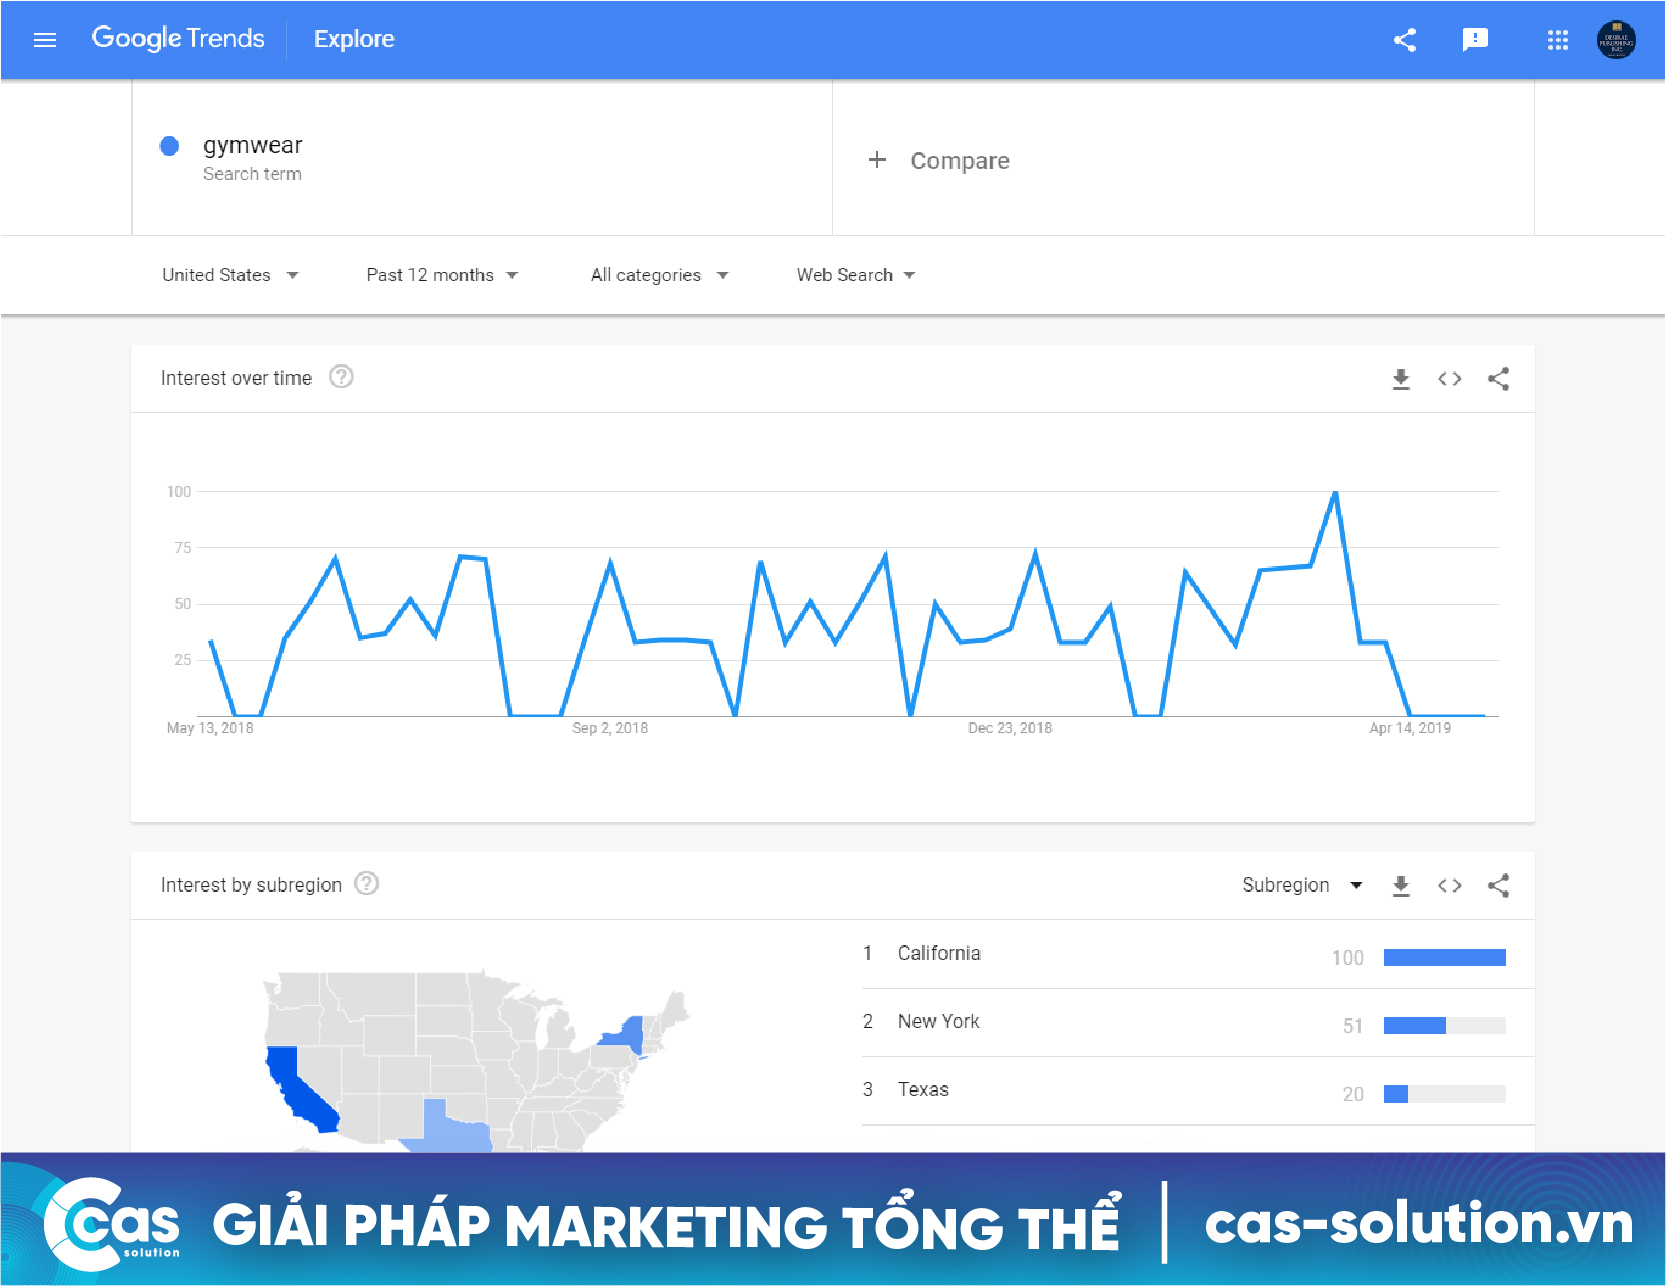 Giao diện của Google Trends